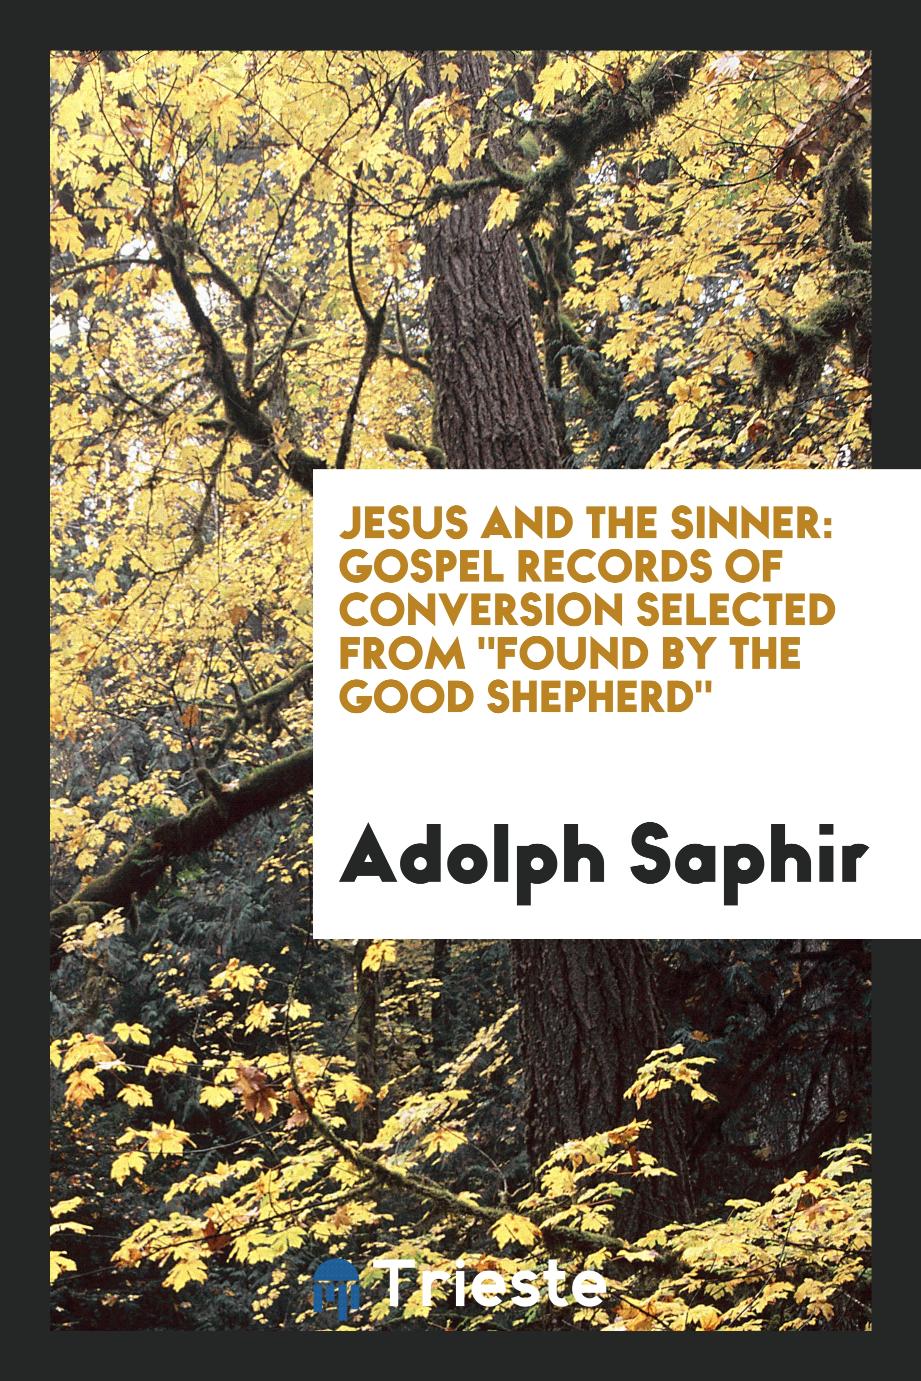 Jesus and the sinner: gospel records of conversion selected from "Found by the good shepherd"